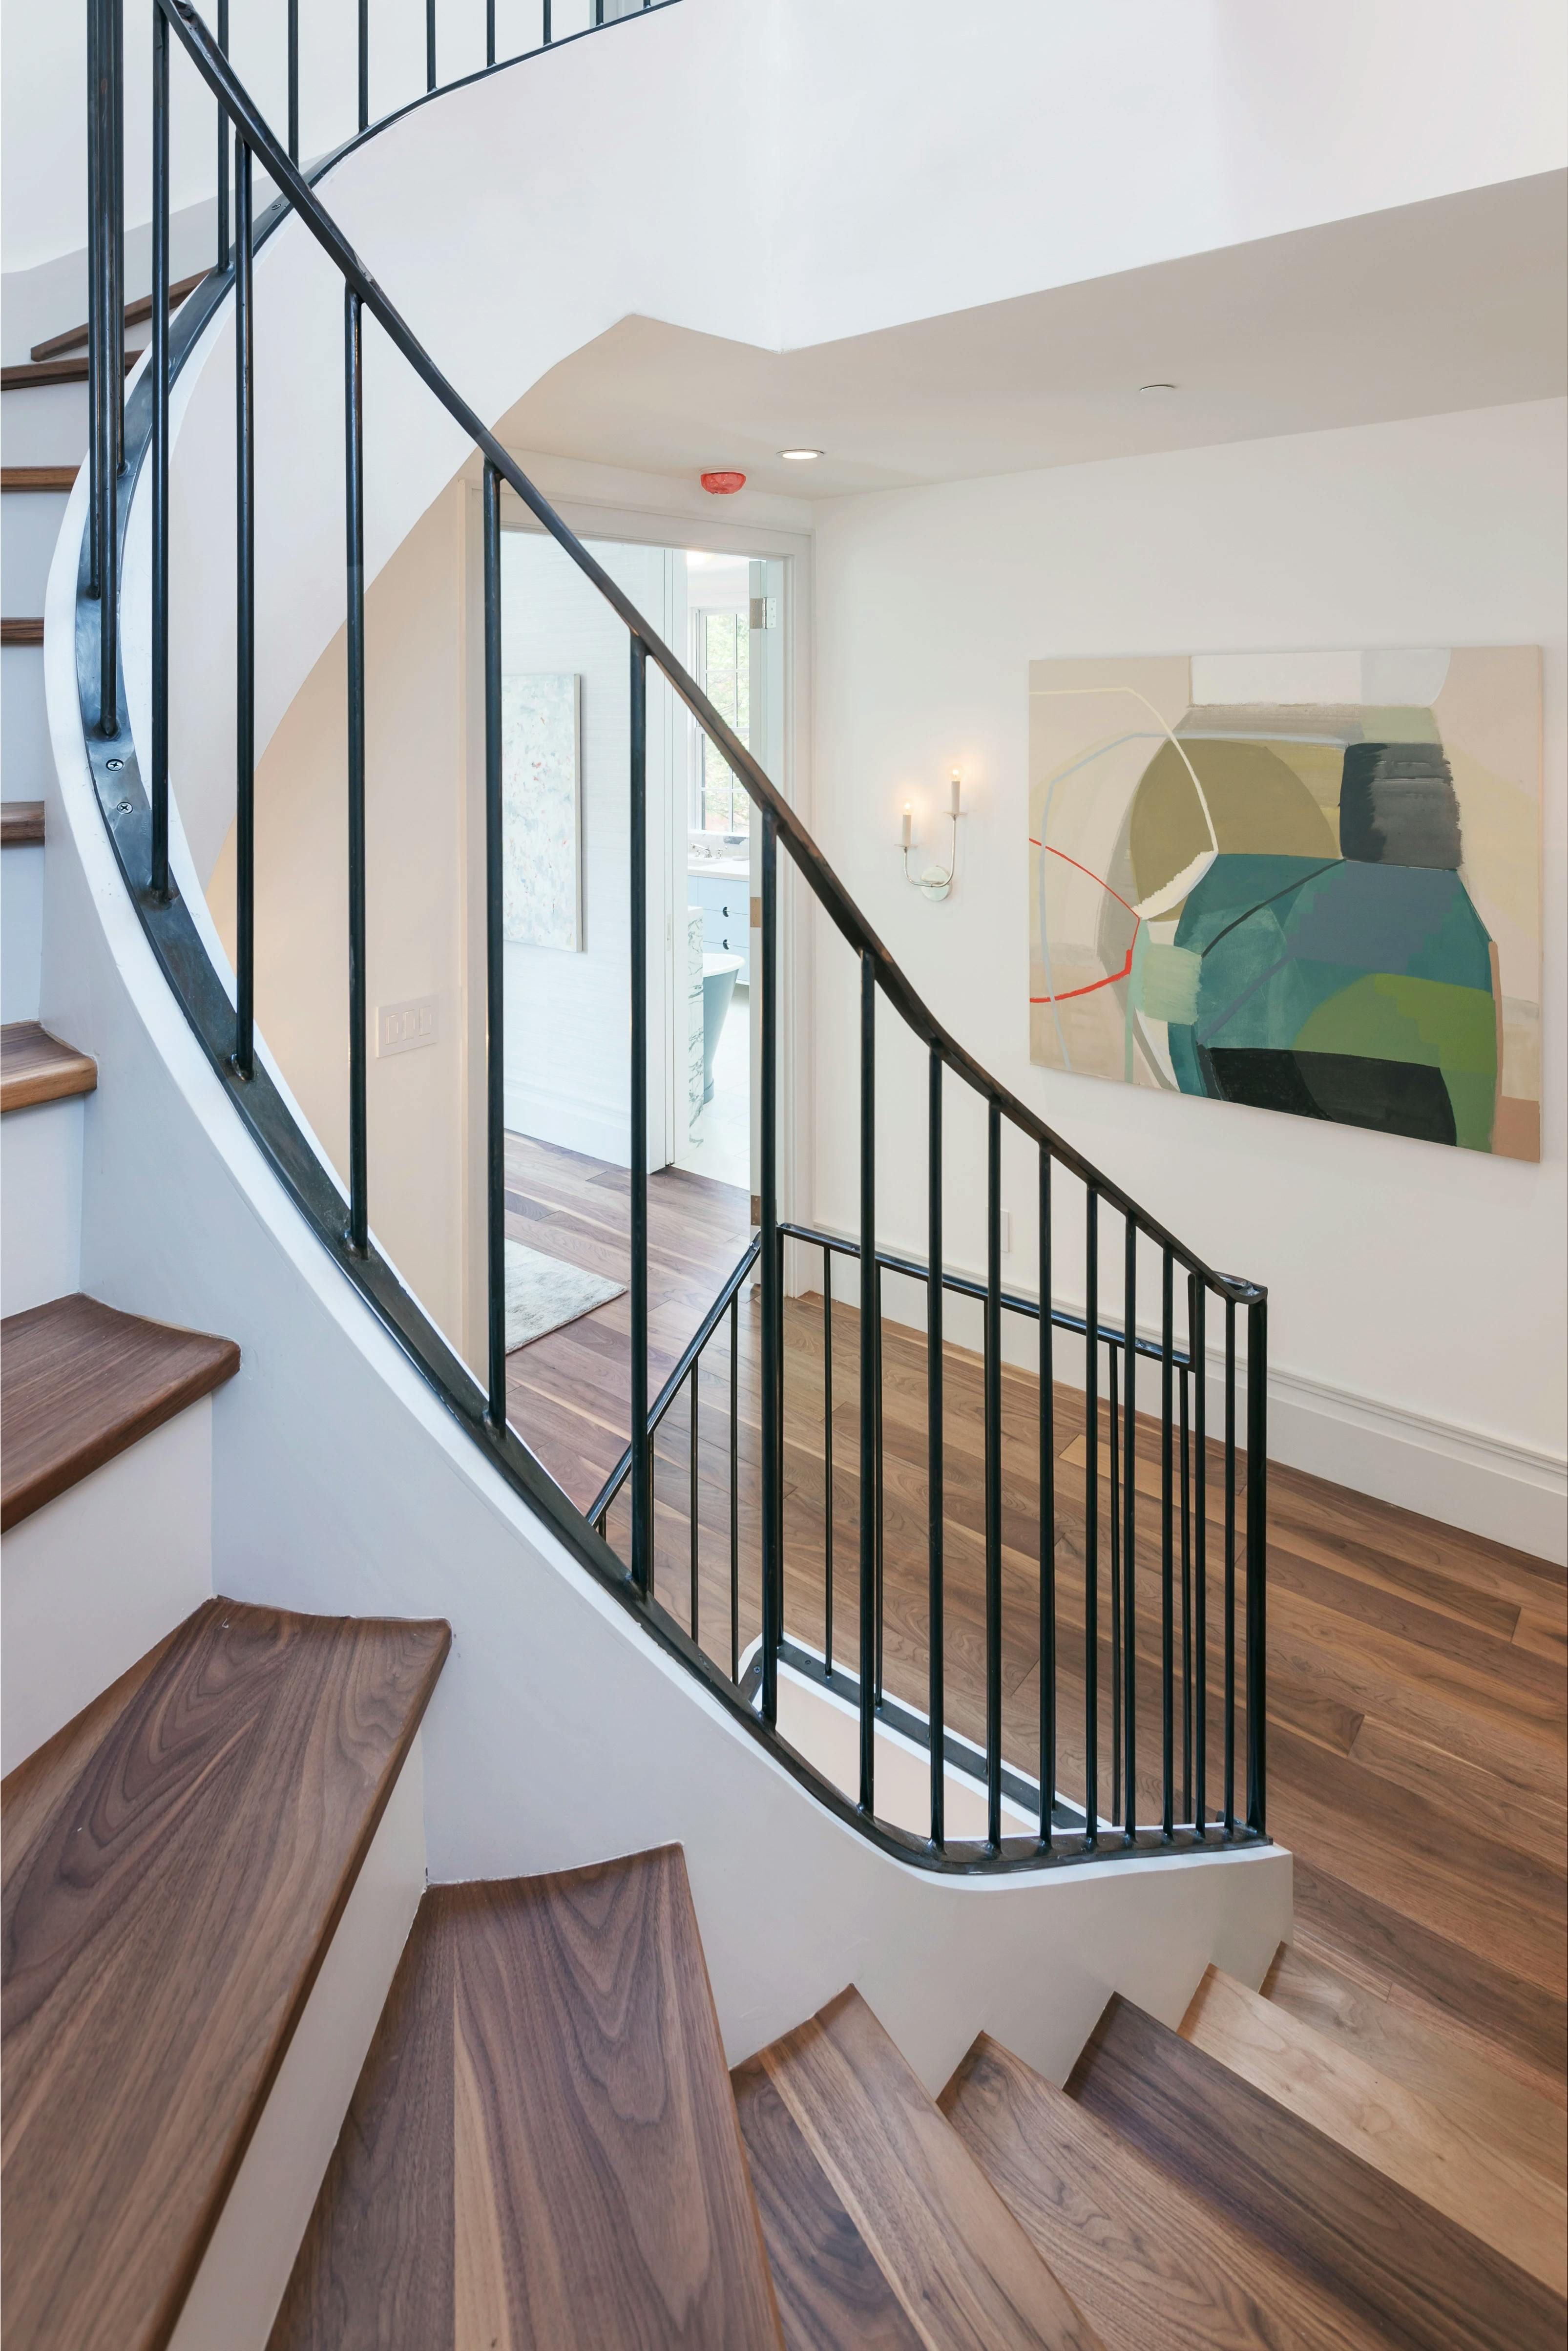 A painting by Ky Anderson installed in the landing of a staircase.